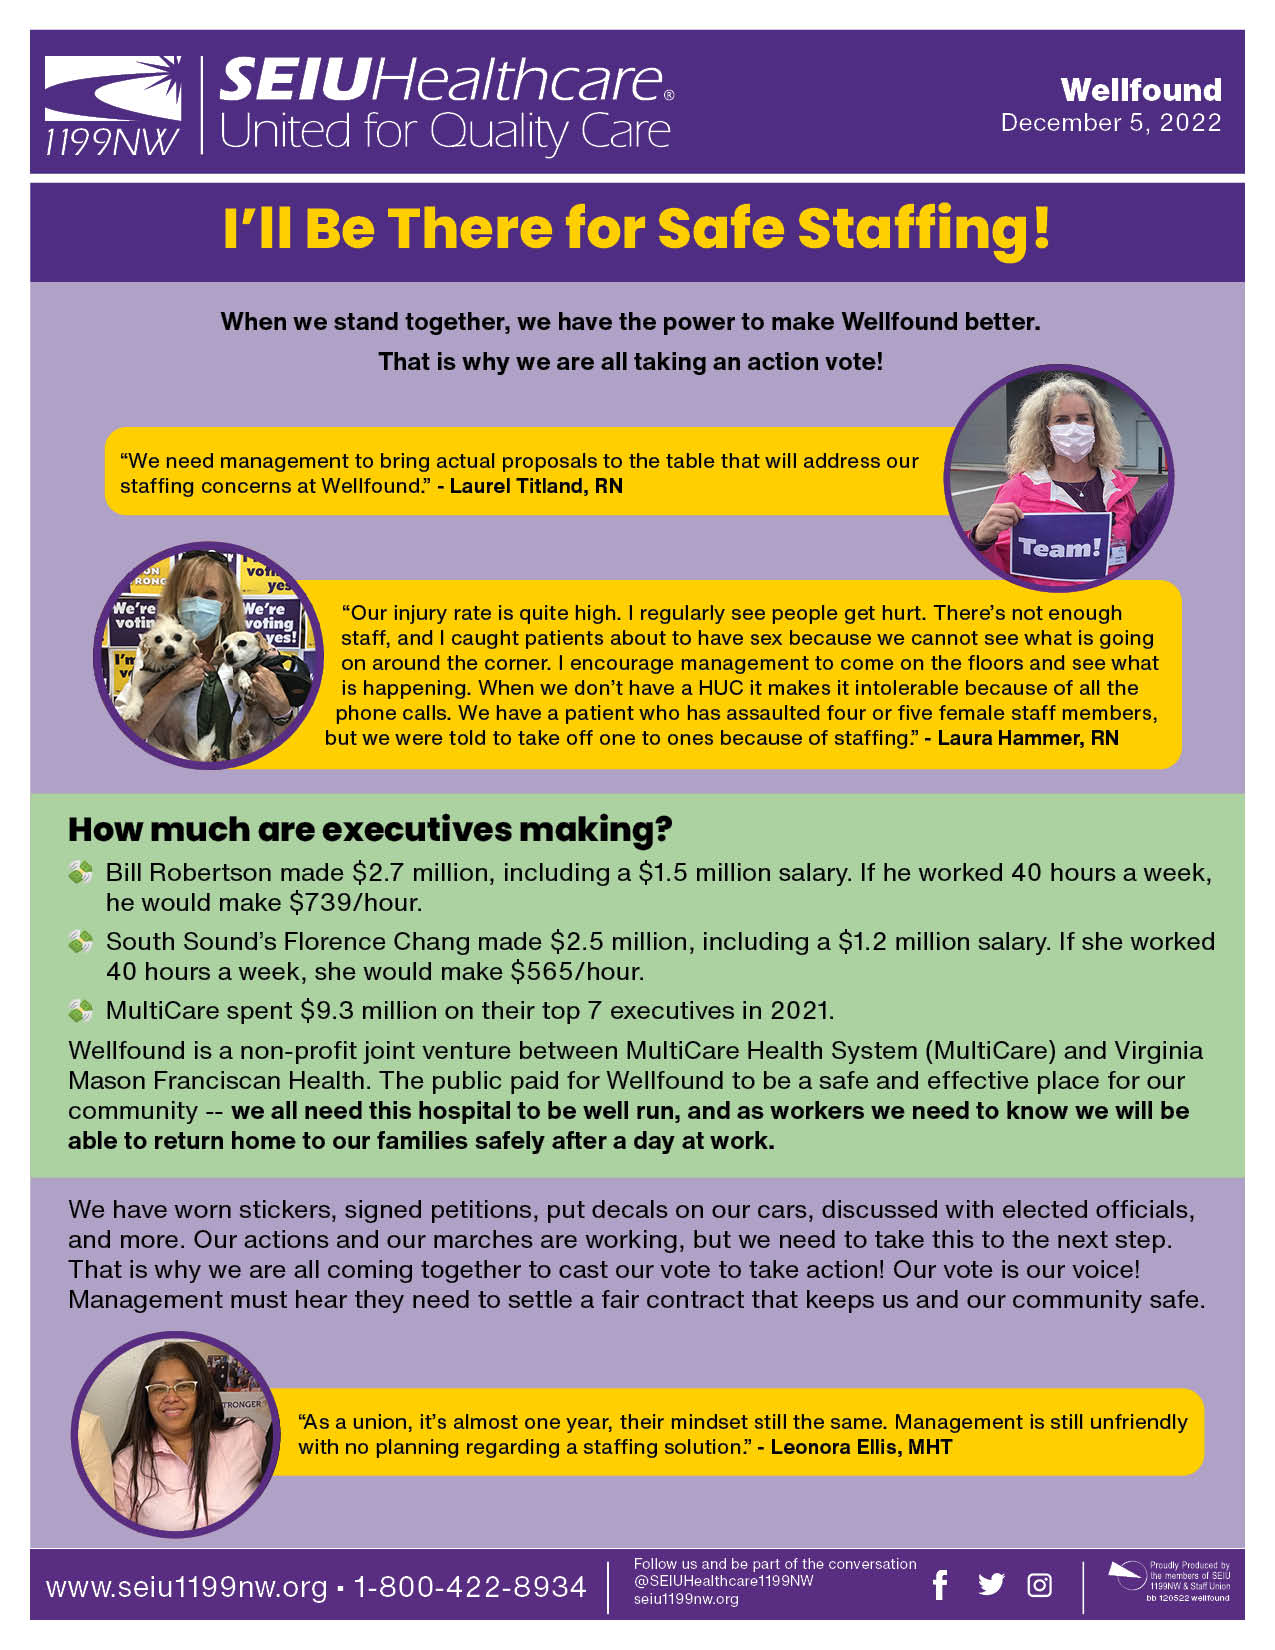 I’ll Be There for Safe Staffing! SEIU Healthcare 1199NW